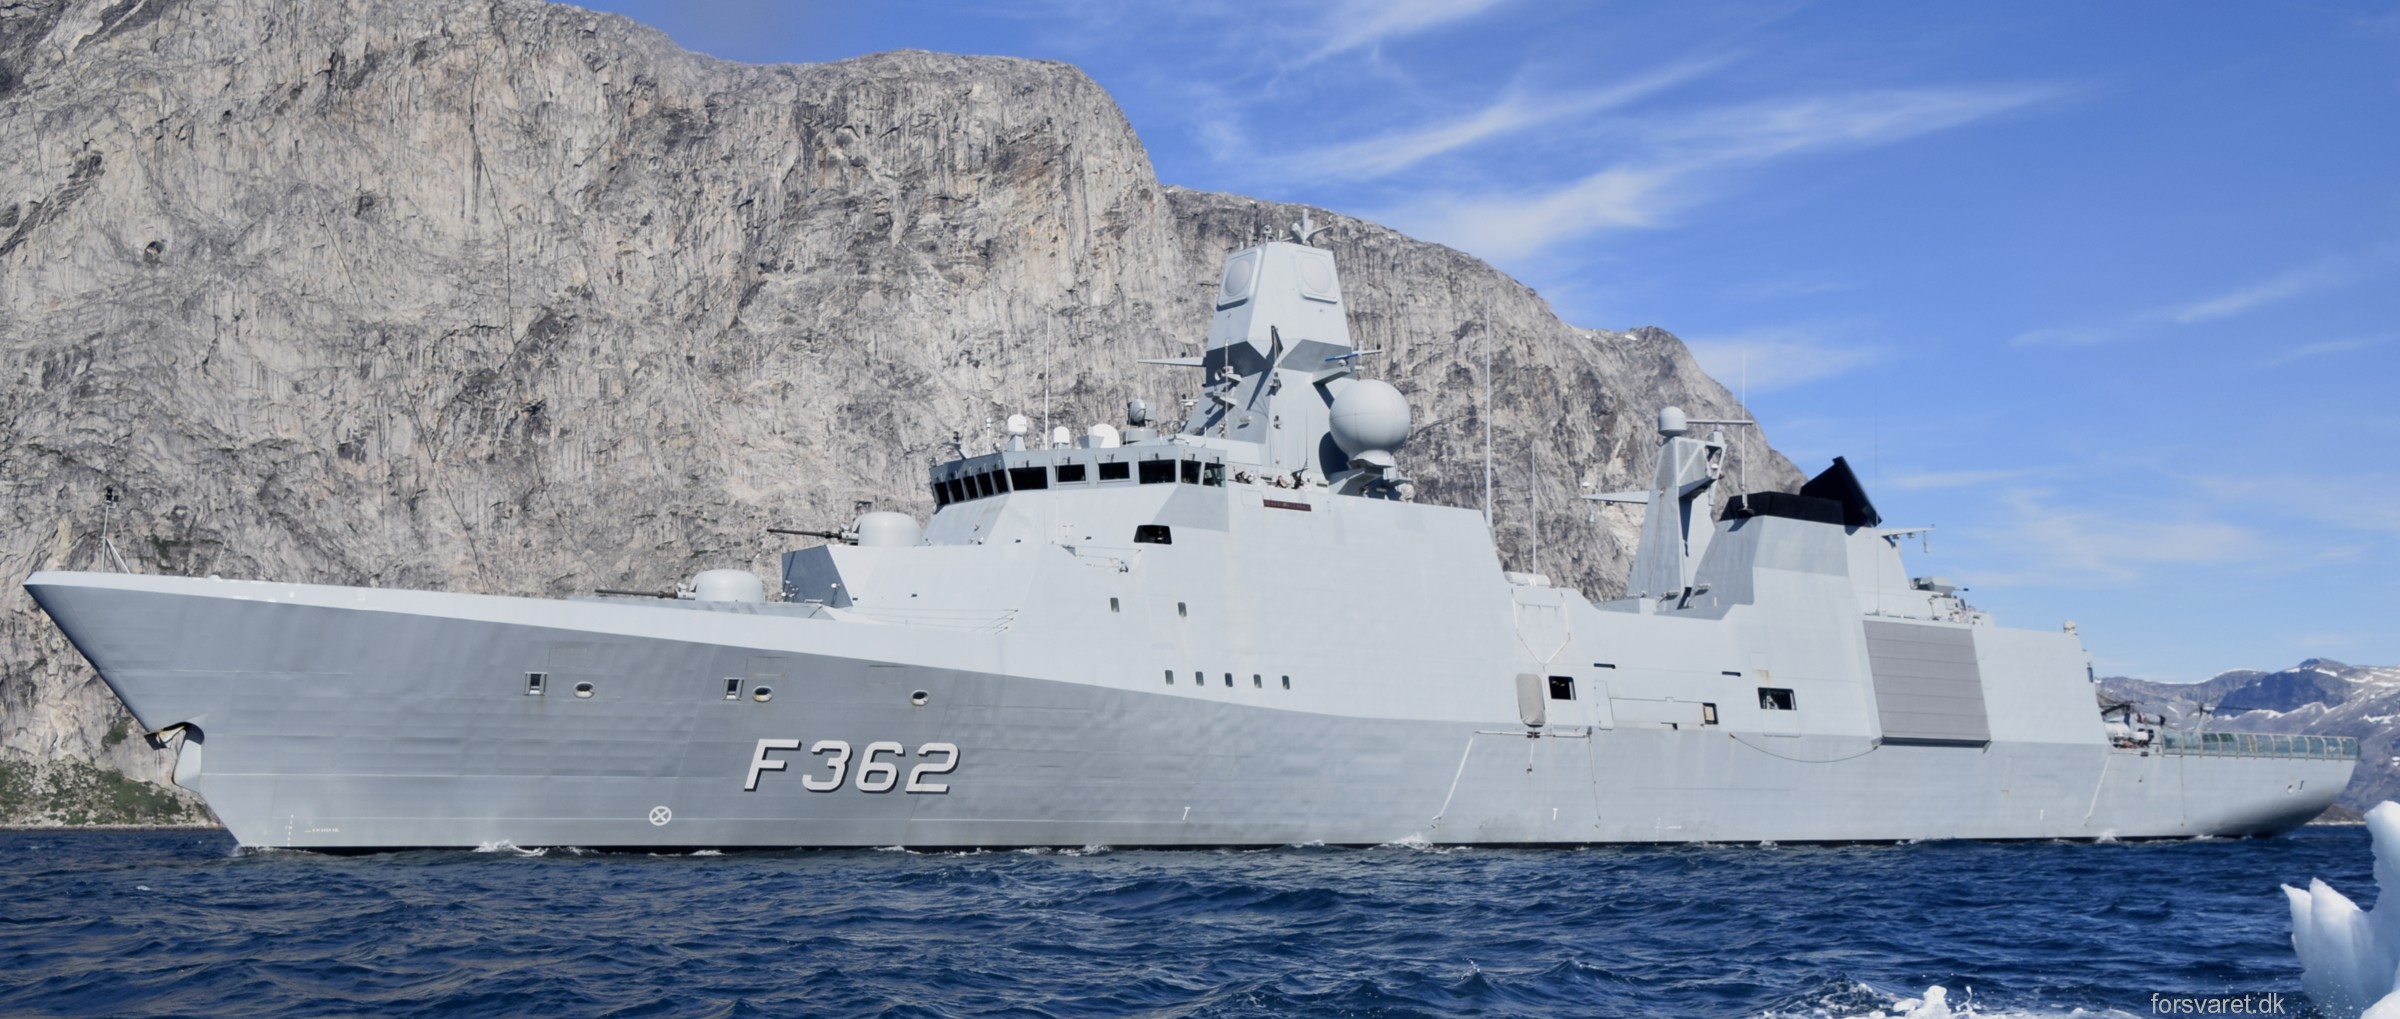 f-362 hdms peter willemoes iver huitfeldt class guided missile frigate ffg royal danish navy 26